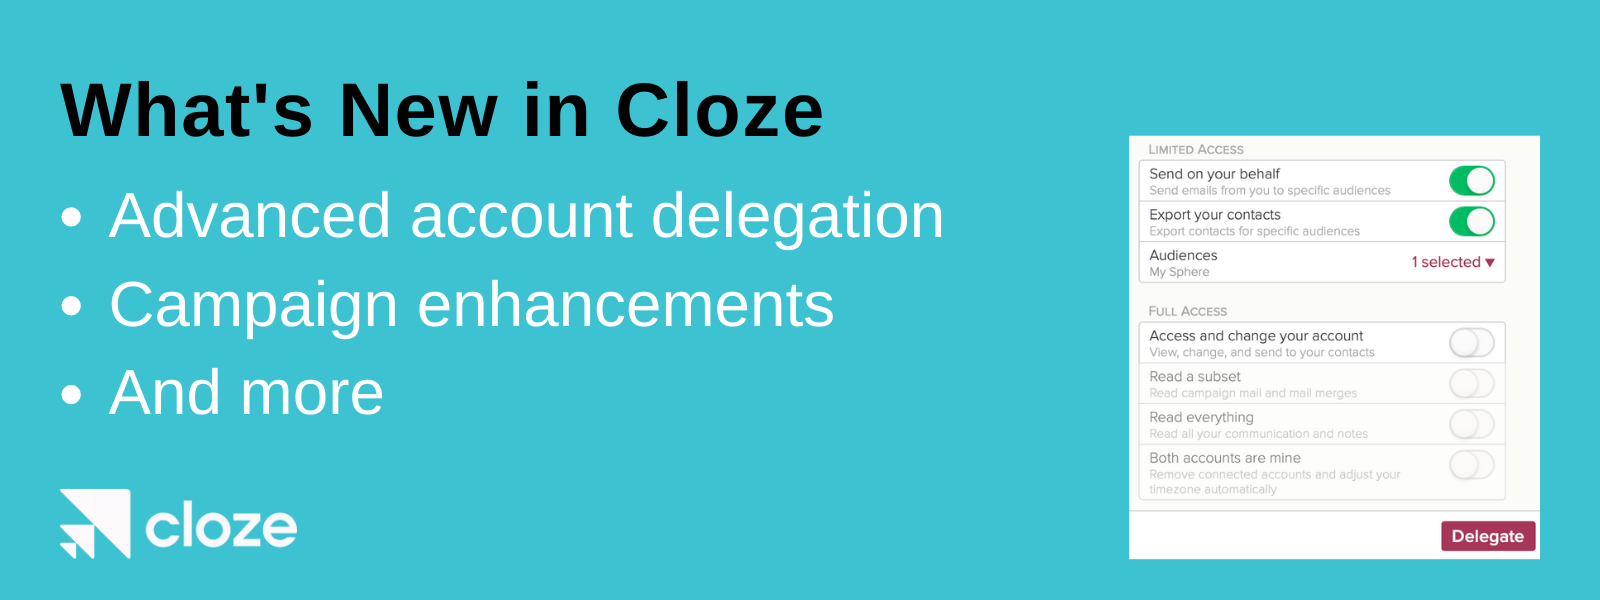 What's new in Cloze. Advanced account delegation, campaigns and more. 